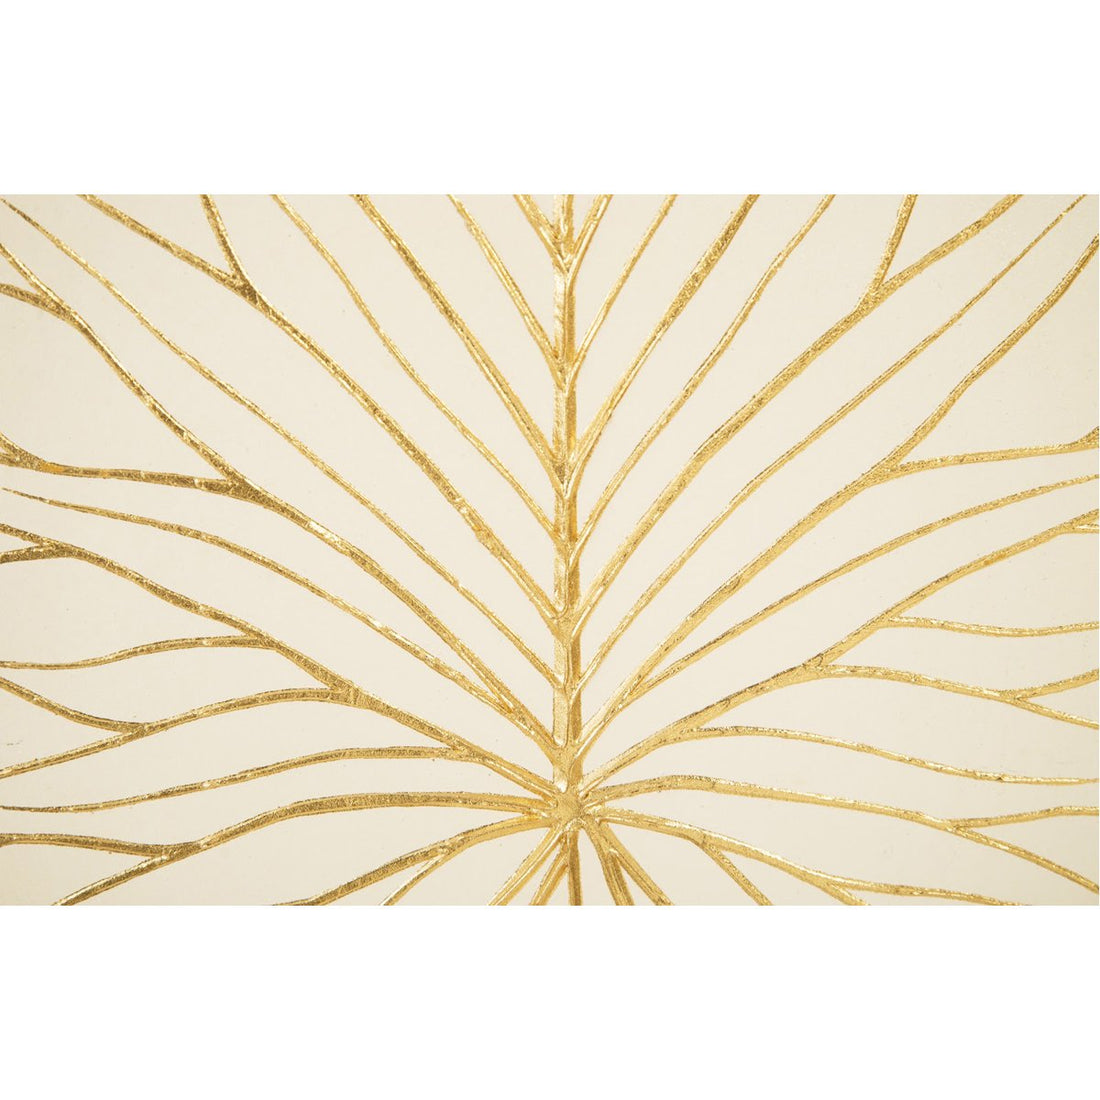 Phillips Collection Rivulet Wall Tile